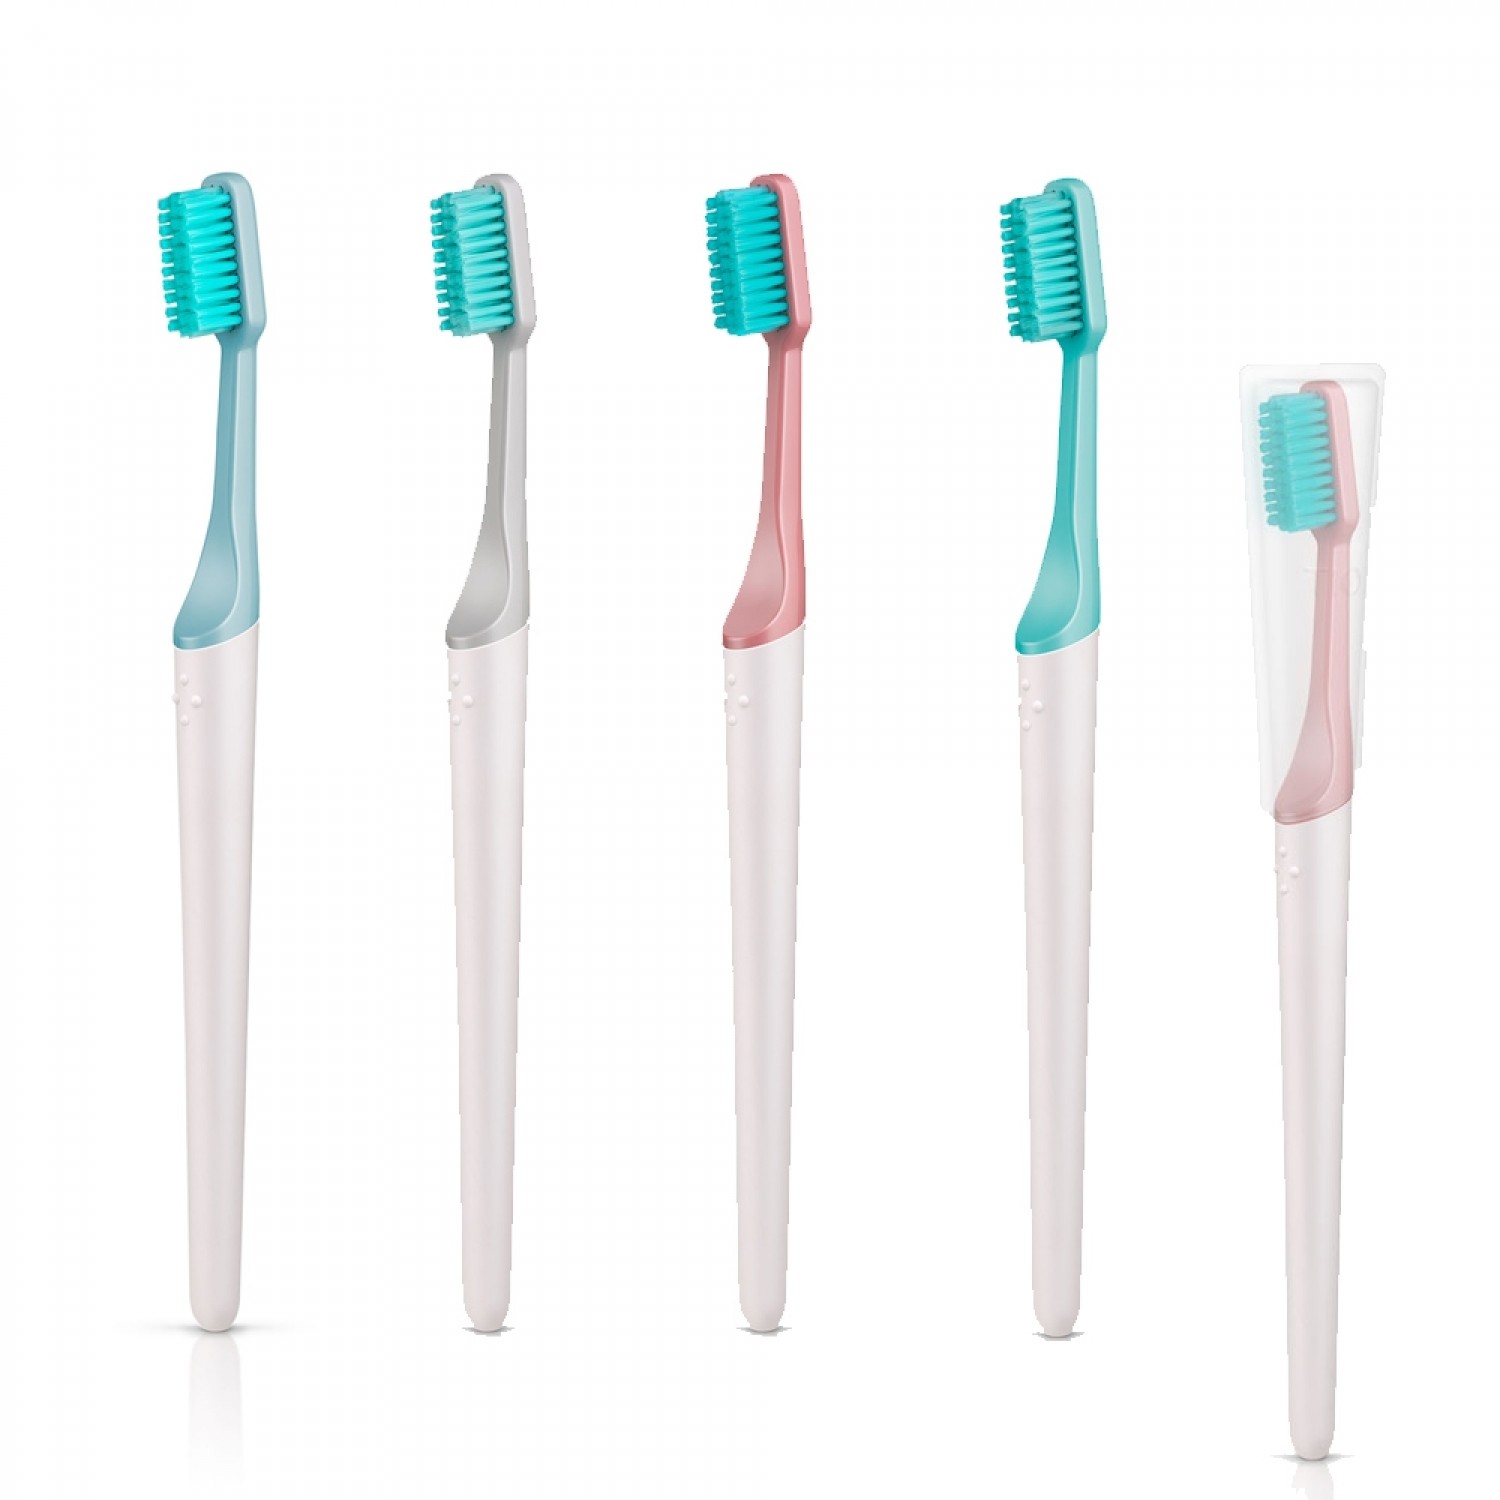 Reusable TIObrush toothbrush with travel case | TIOcare